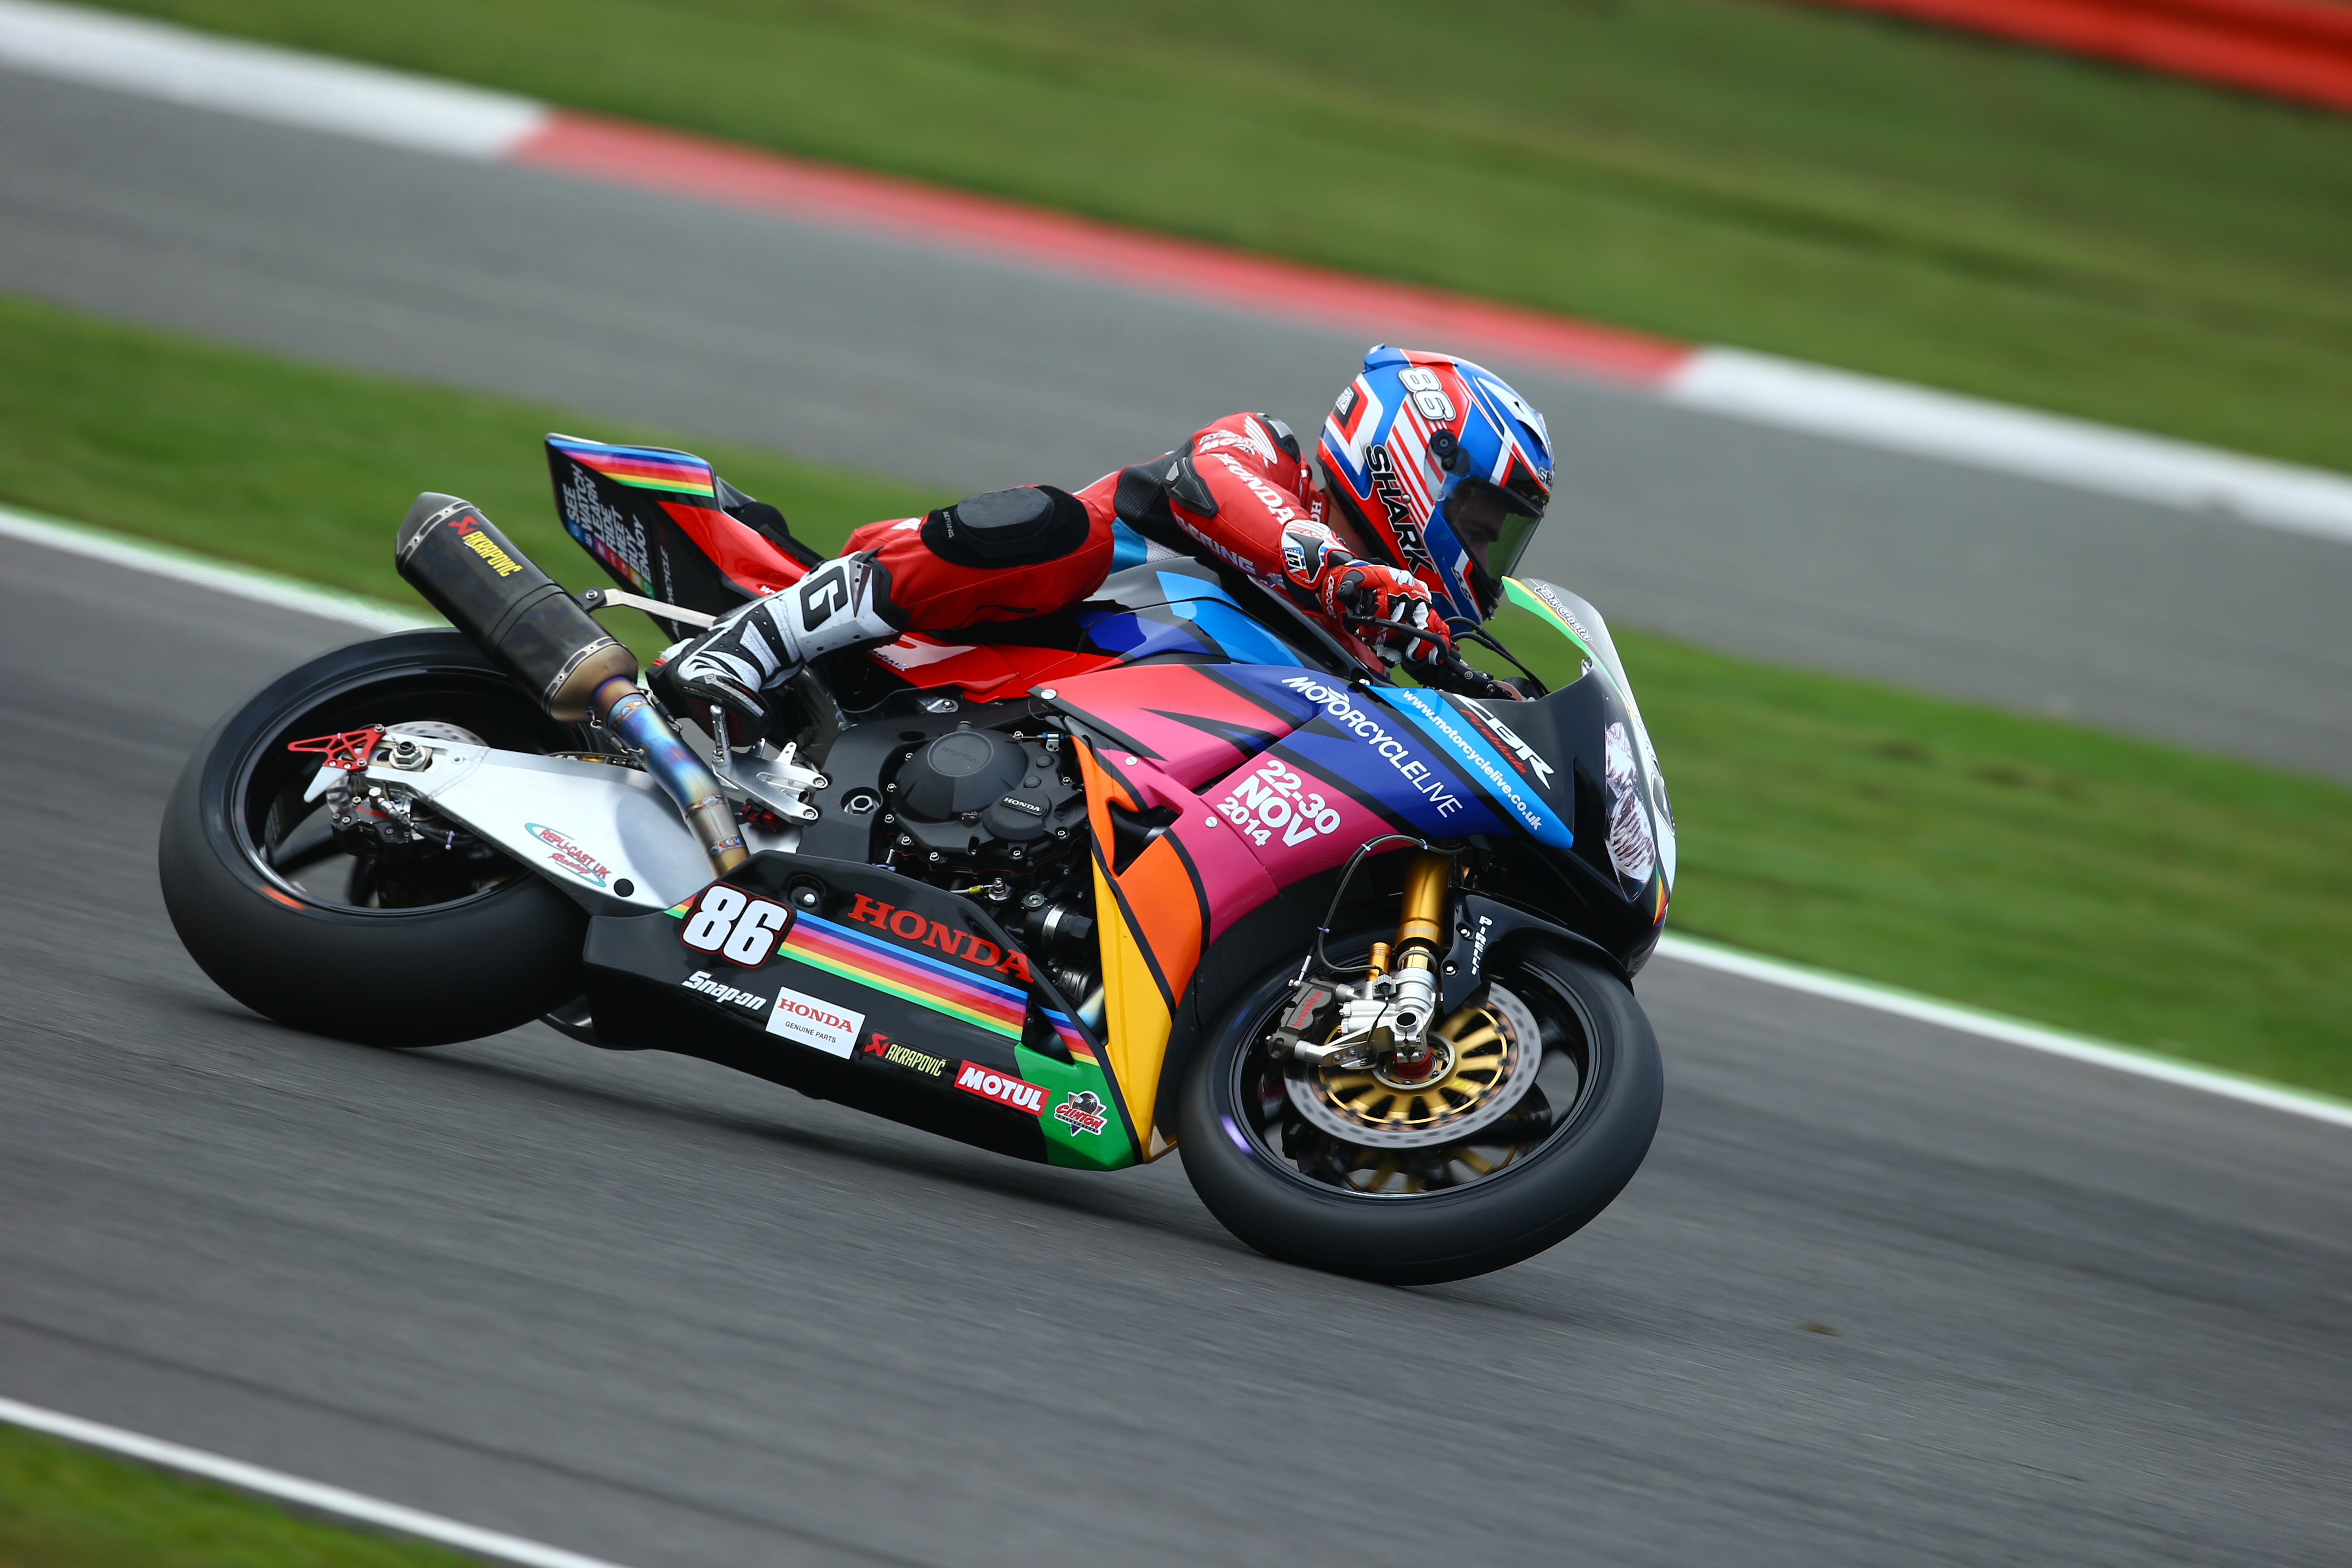 Motorcycle Live livery Fireblade to race at Silverstone